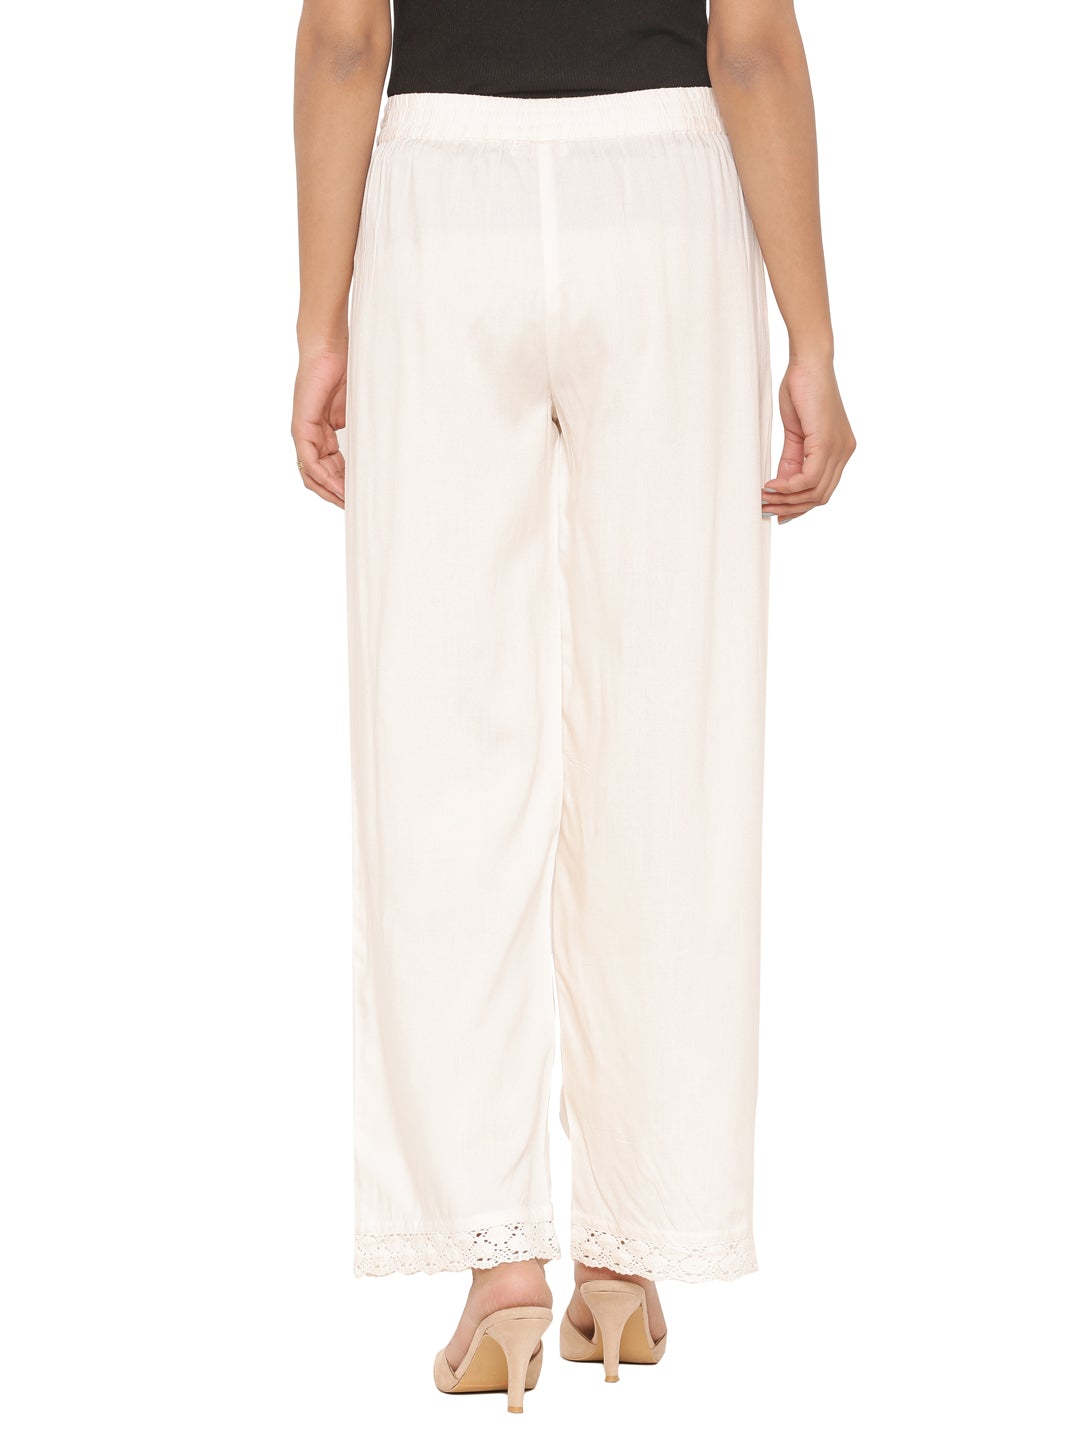 Juniper Ivory Solid Rayon Wide Leg Women Palazzo With One Pocket